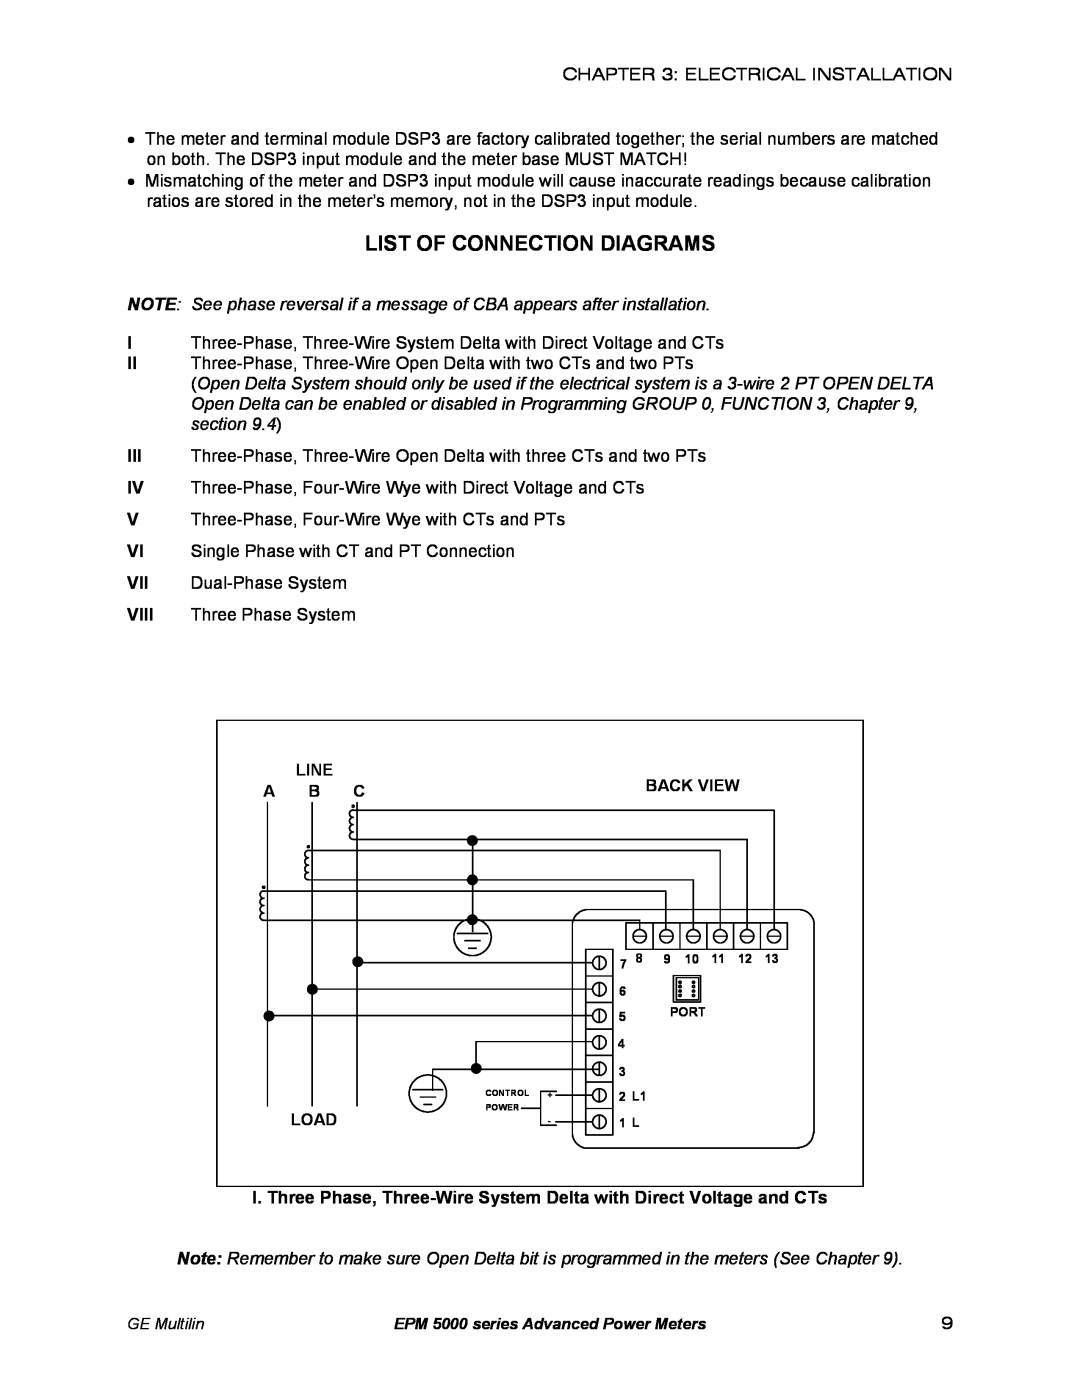 GE EPM 5300, EPM 5200 List Of Connection Diagrams, I. Three Phase, Three-Wire System Delta with Direct Voltage and CTs 